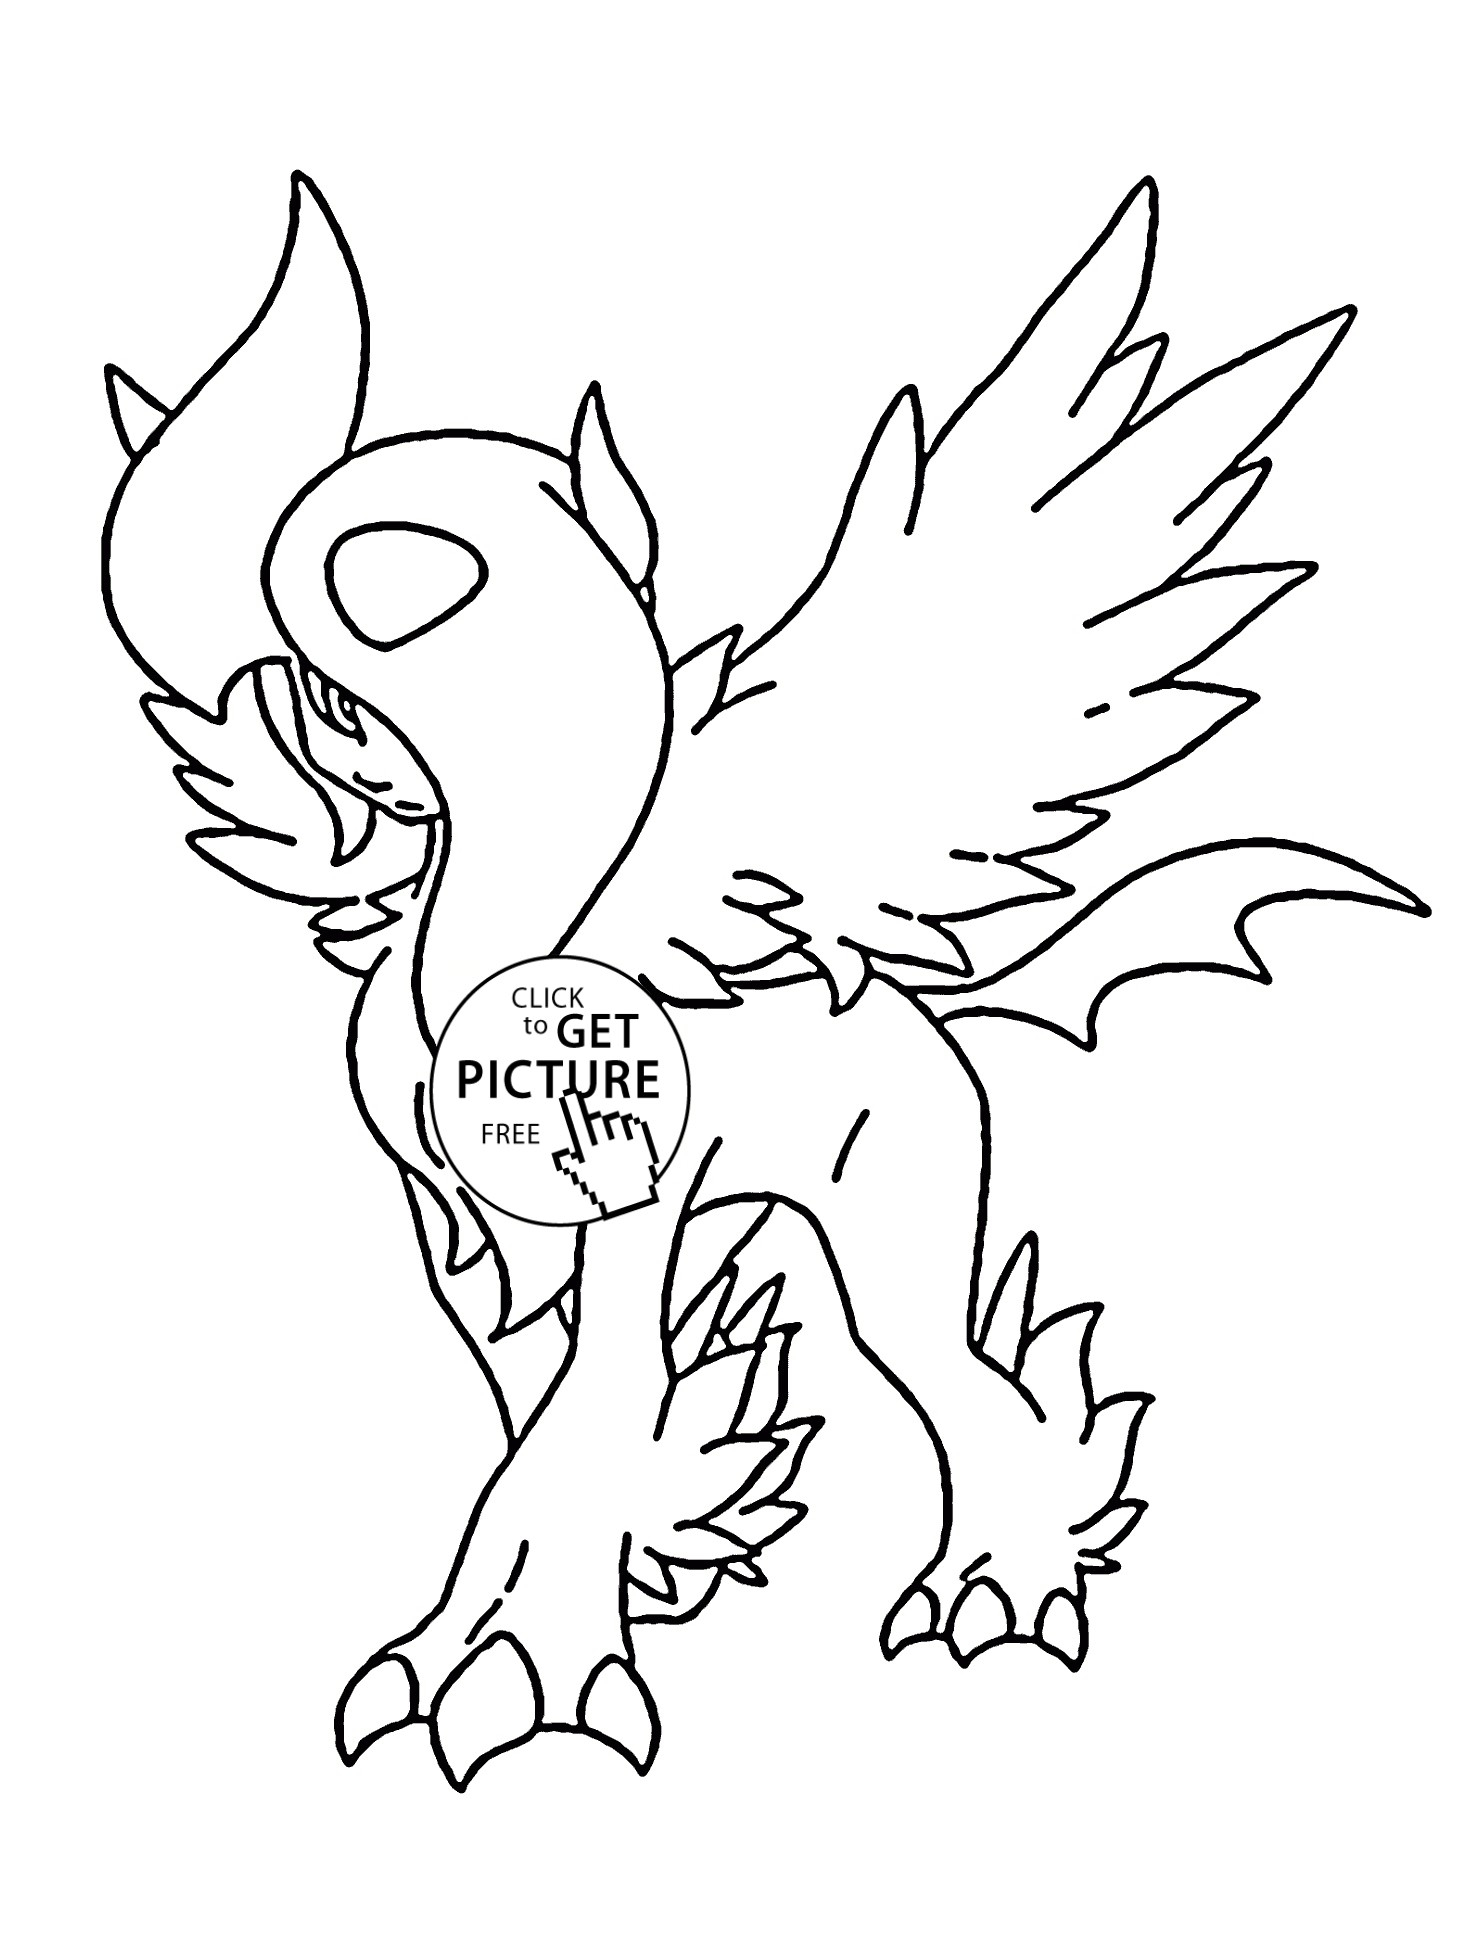 Charizard Coloring Pages Coloring Book Ideas Pokemonrd Coloring Pages Picture Inspirations